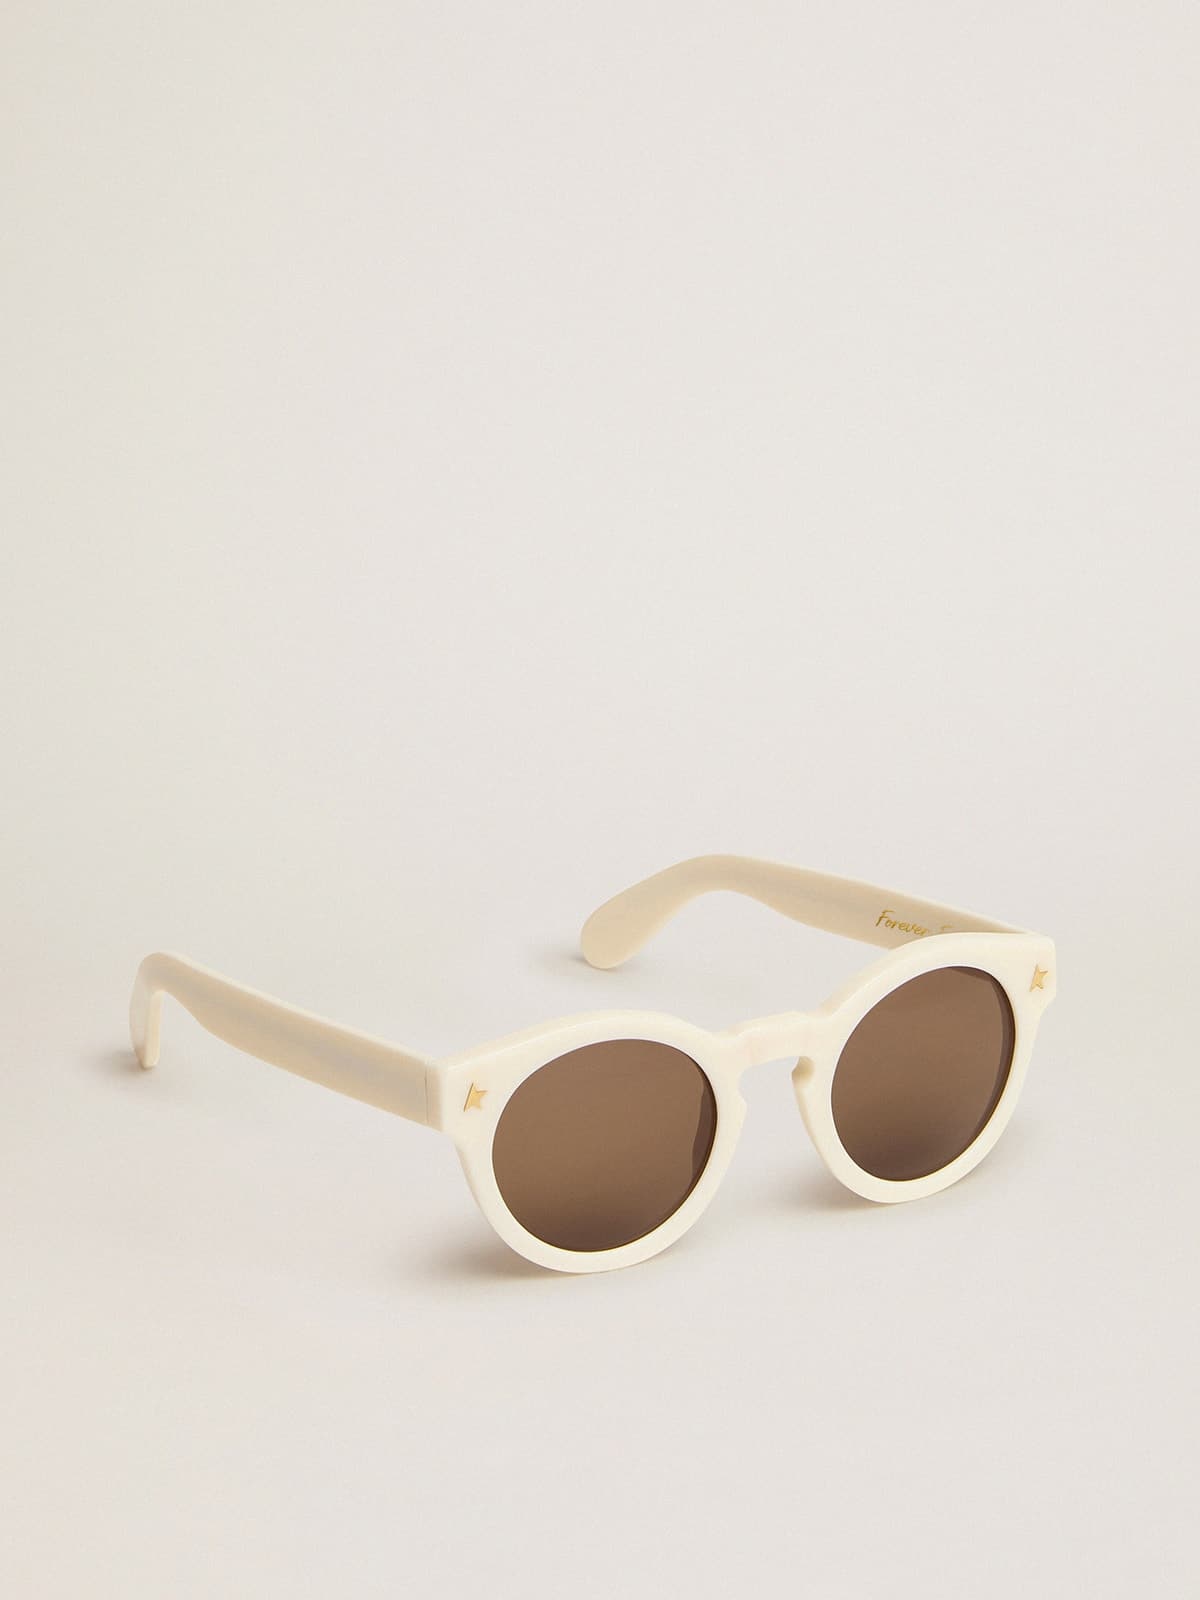 Sunglasses Panthos model with white frame and gold details - 1